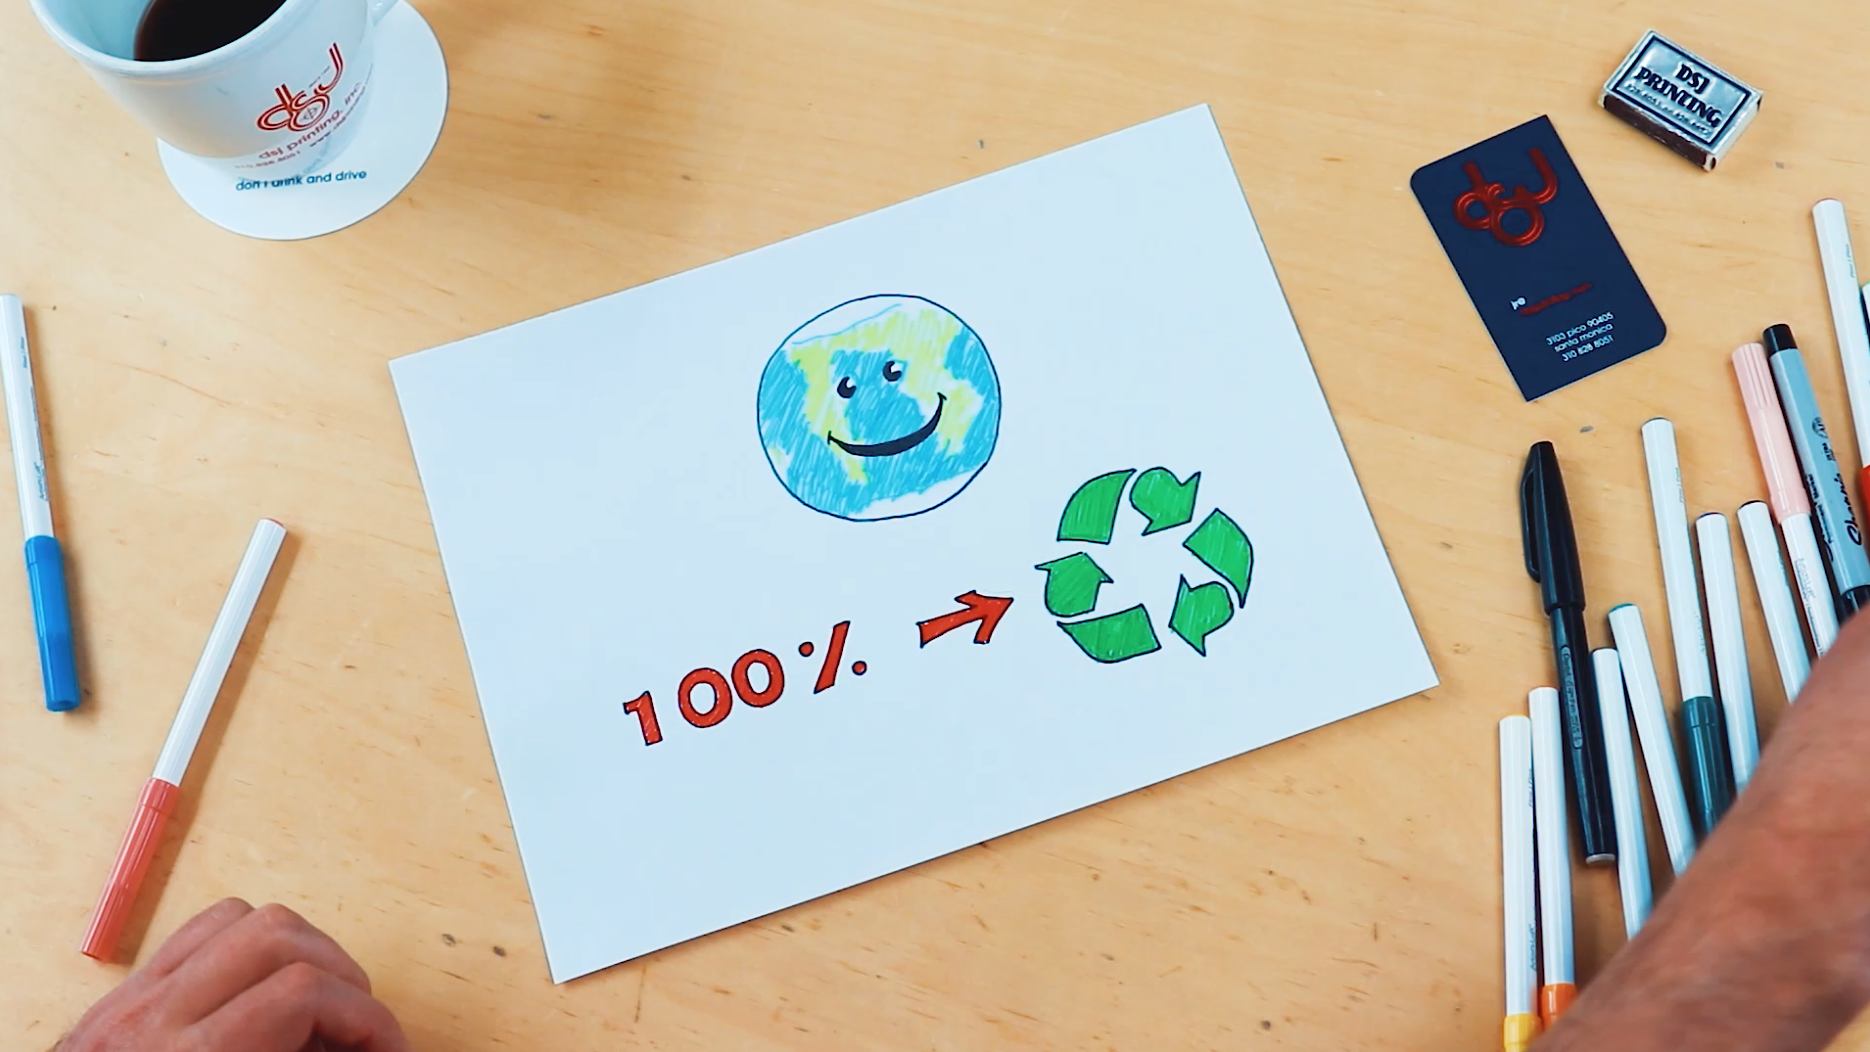 We make it easy to Reduce, Reuse & Recycle!